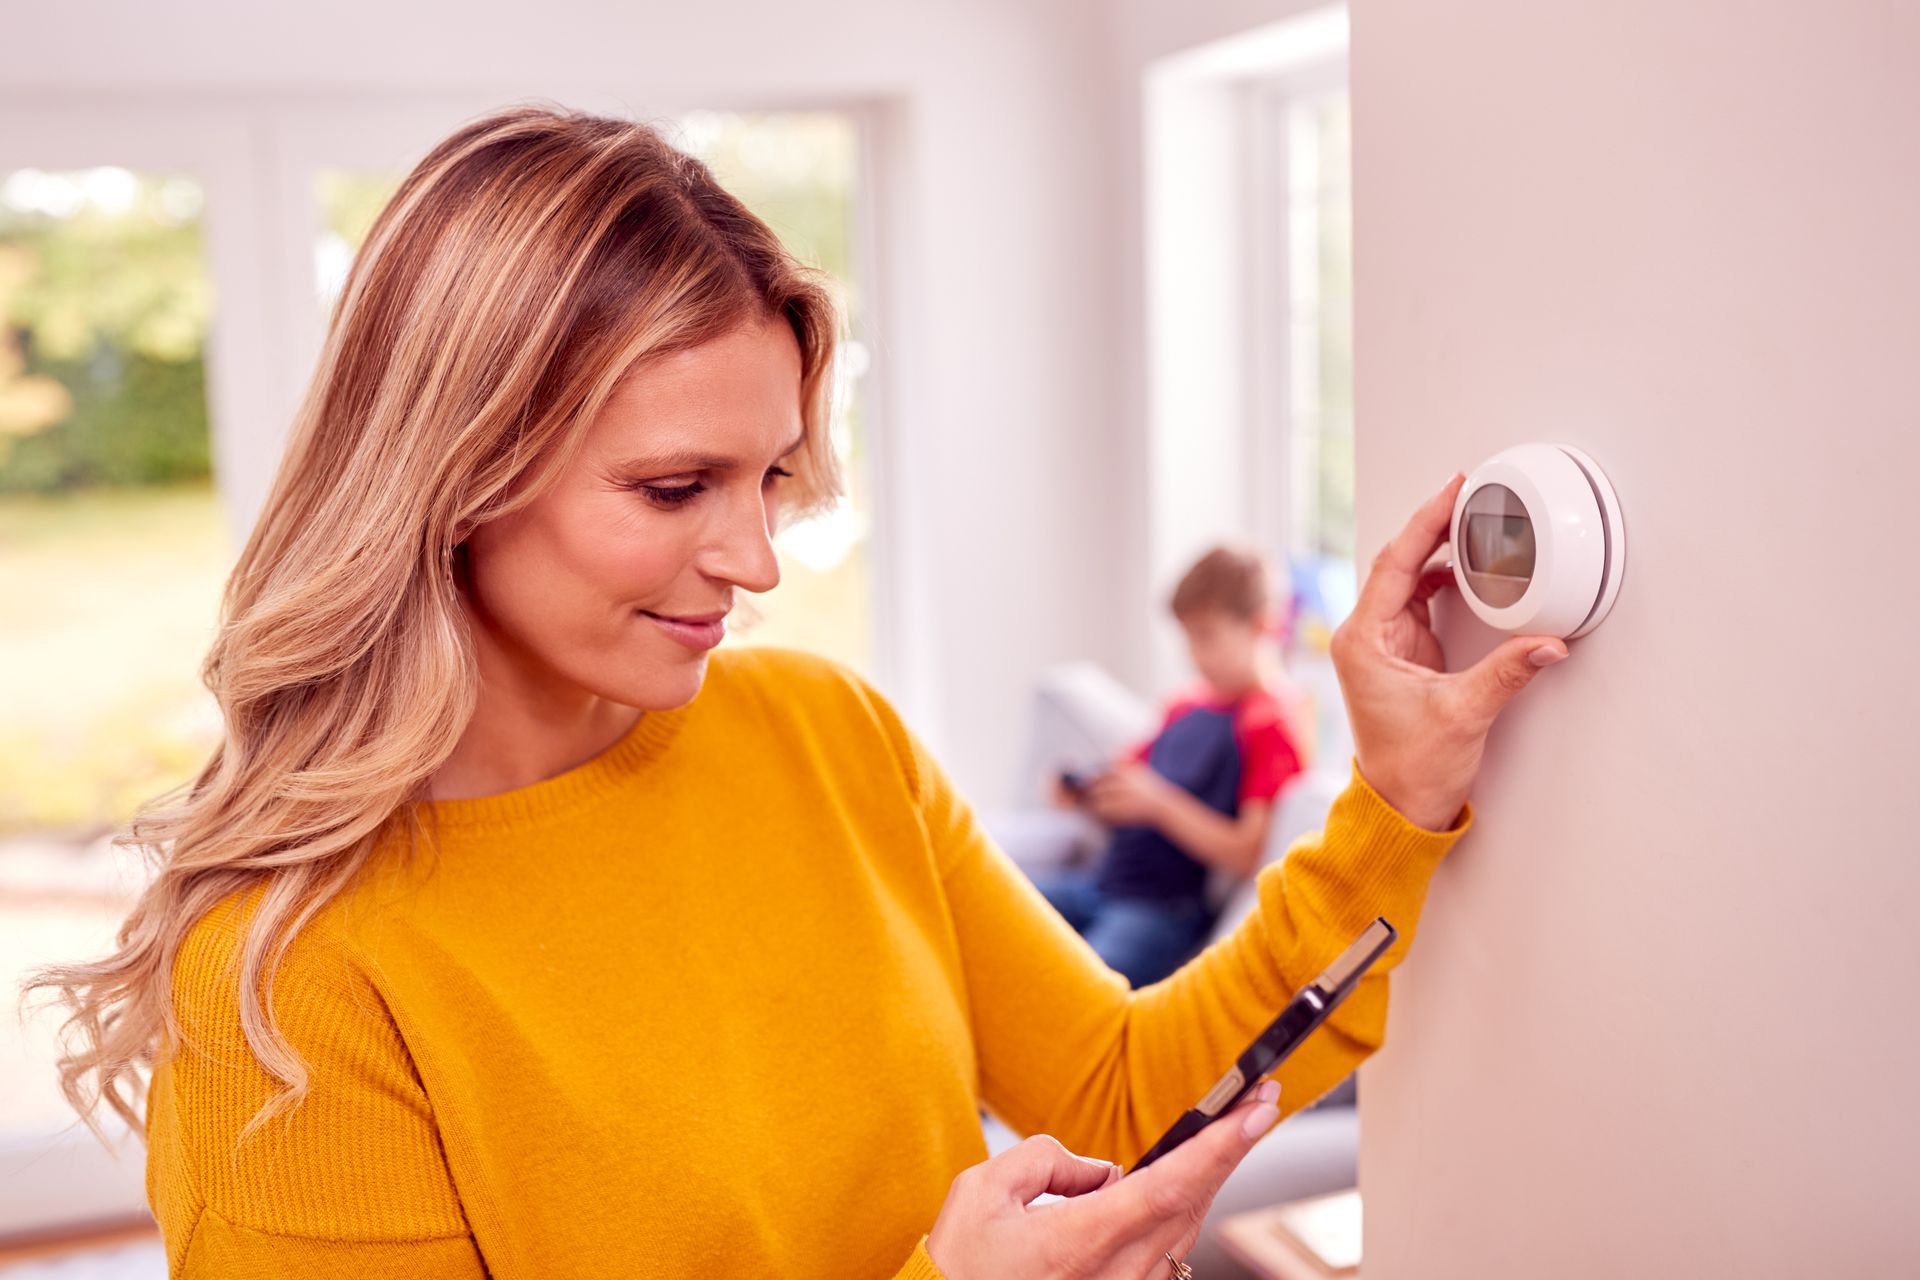 a woman is adjusting a thermostat on a wall while using a smart phone .